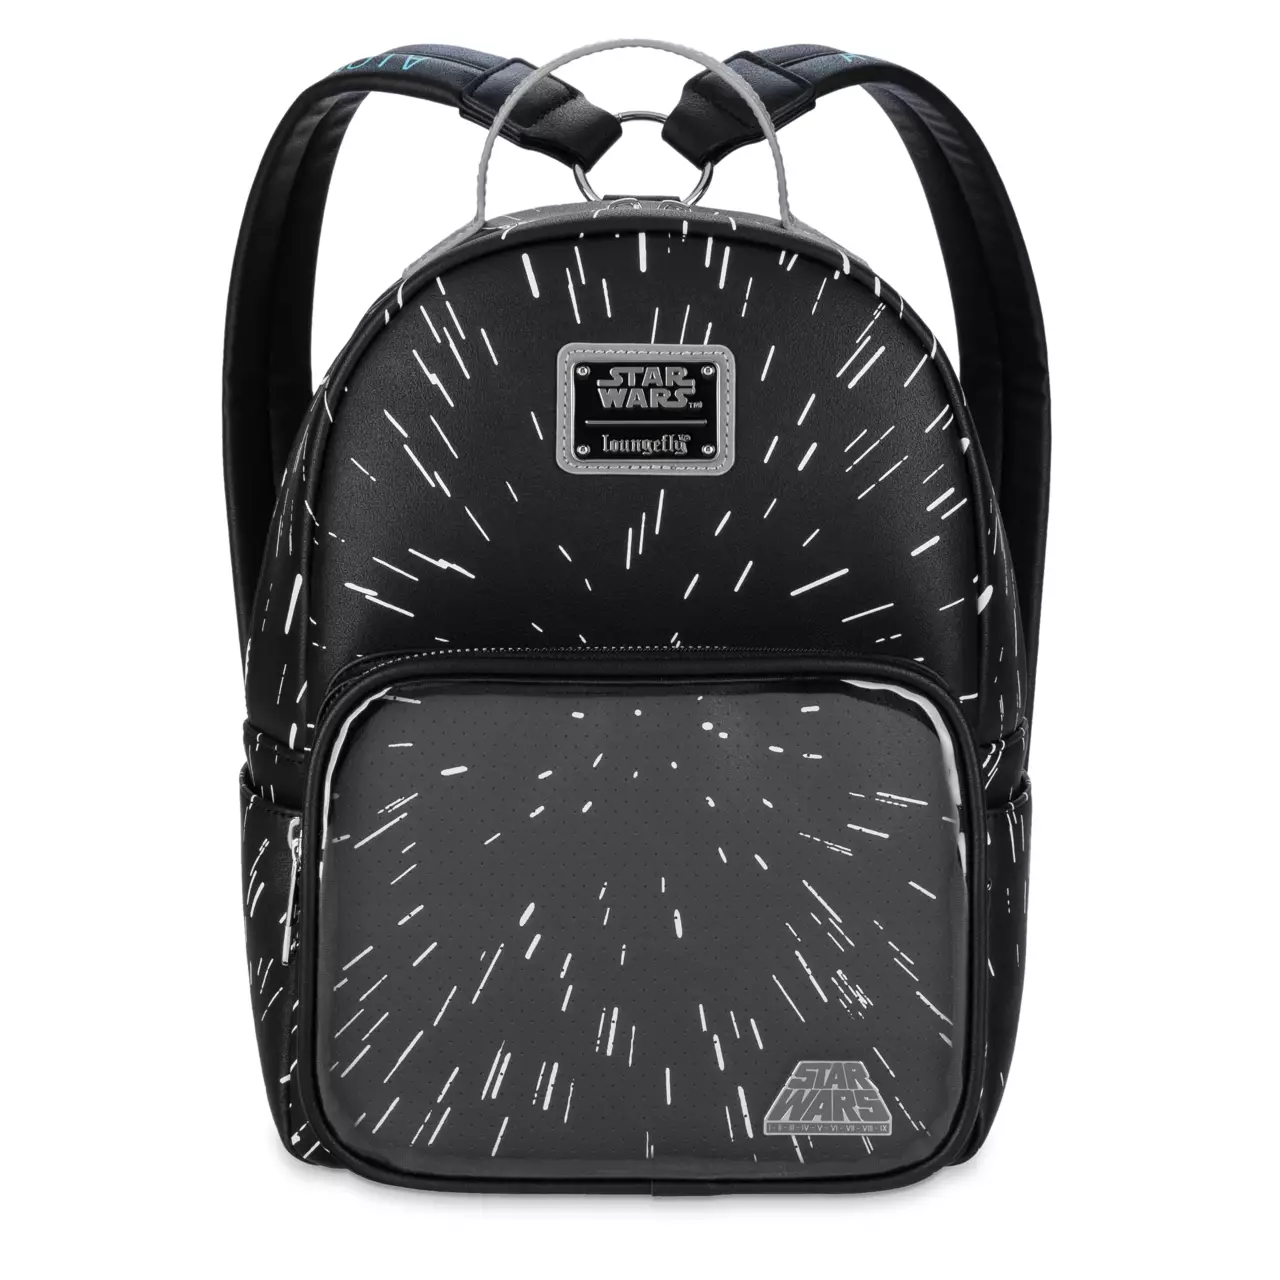 Star Wars: A New Hope Loungefly Backpack